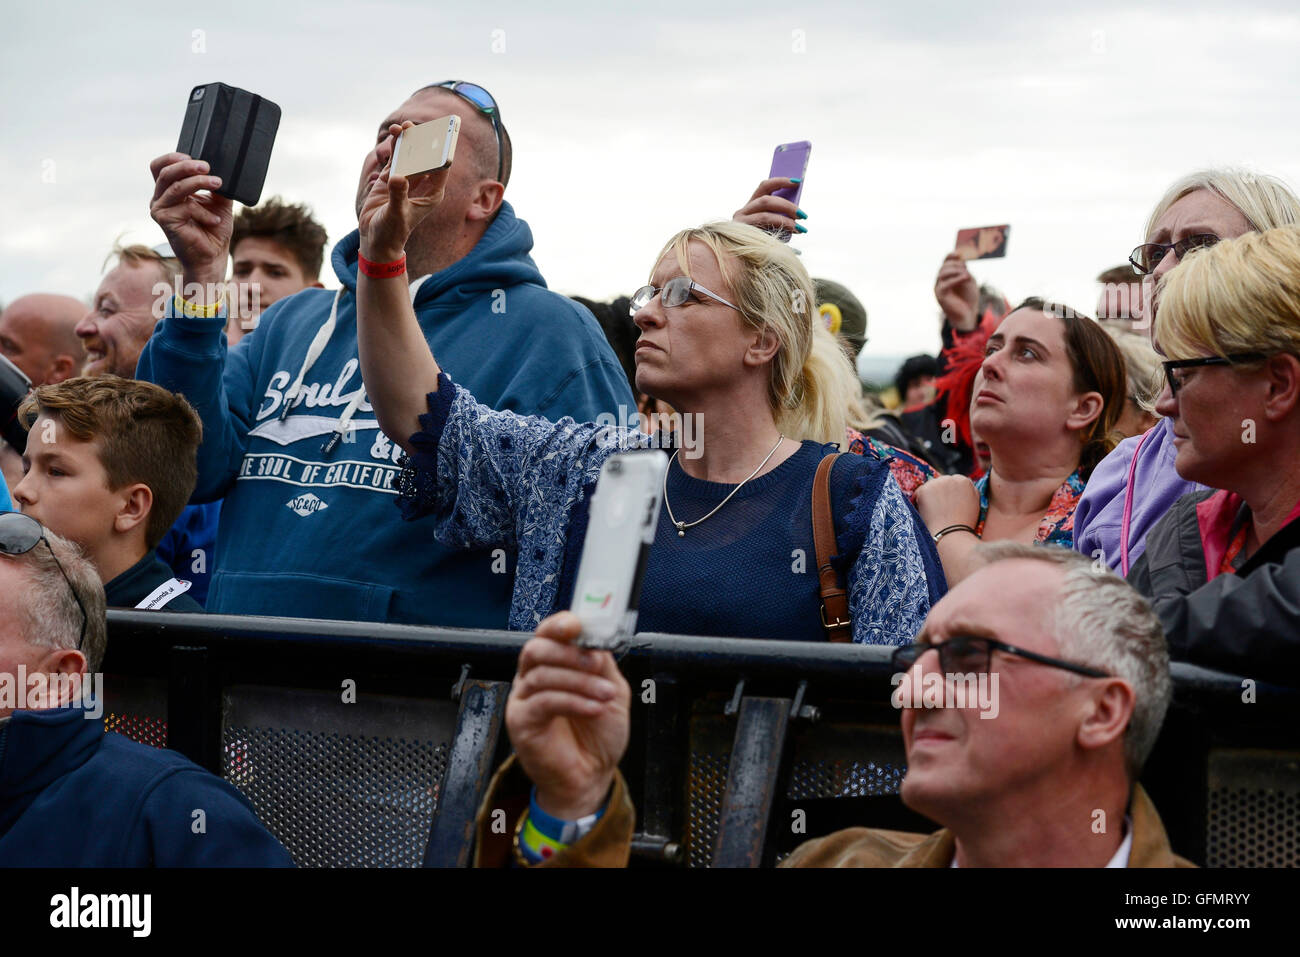 Carfest North, Bolesworth, Cheshire, UK. 31st July 2016. People filming a performance on the Main stage. The event is the brainchild of Chris Evans and features 3 days of cars, music and entertainment with profits being donated to the charity Children in Need. Andrew Paterson/Alamy Live News Stock Photo